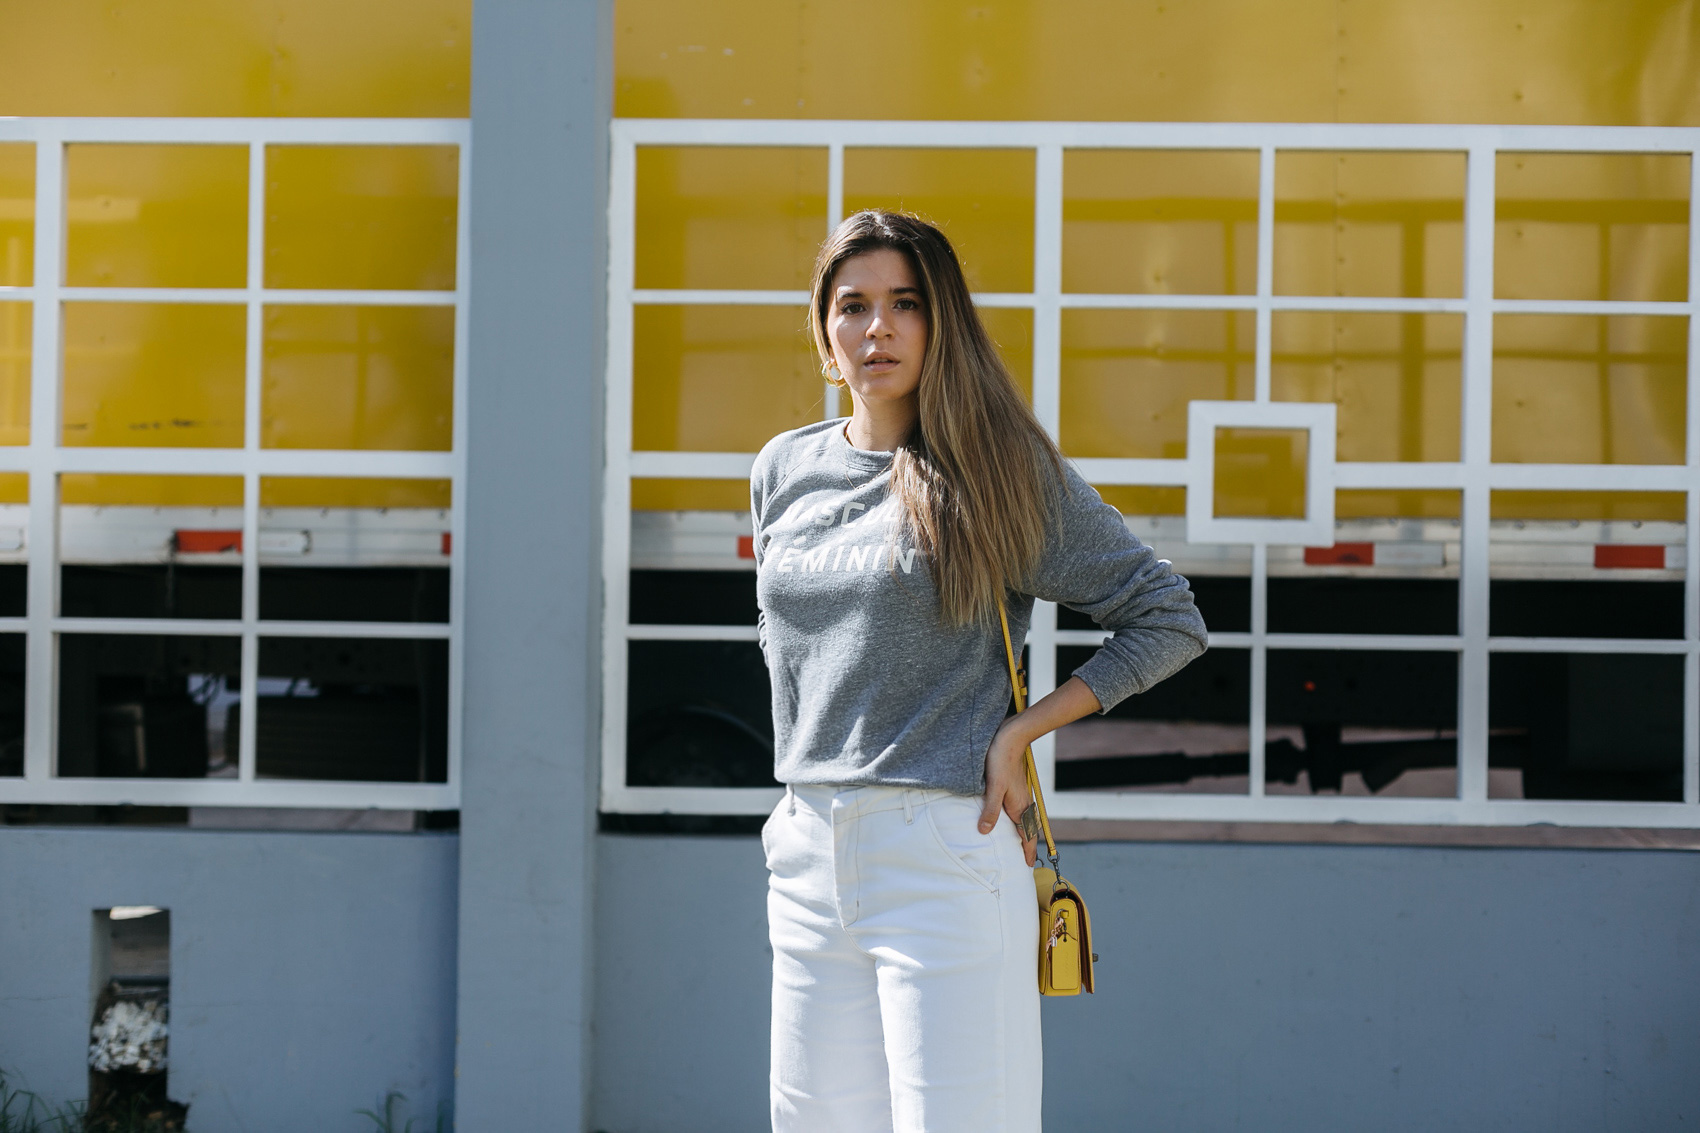 Maristella wearing a grey sweatshirt with white jeans and yellow Coach Dinky bag